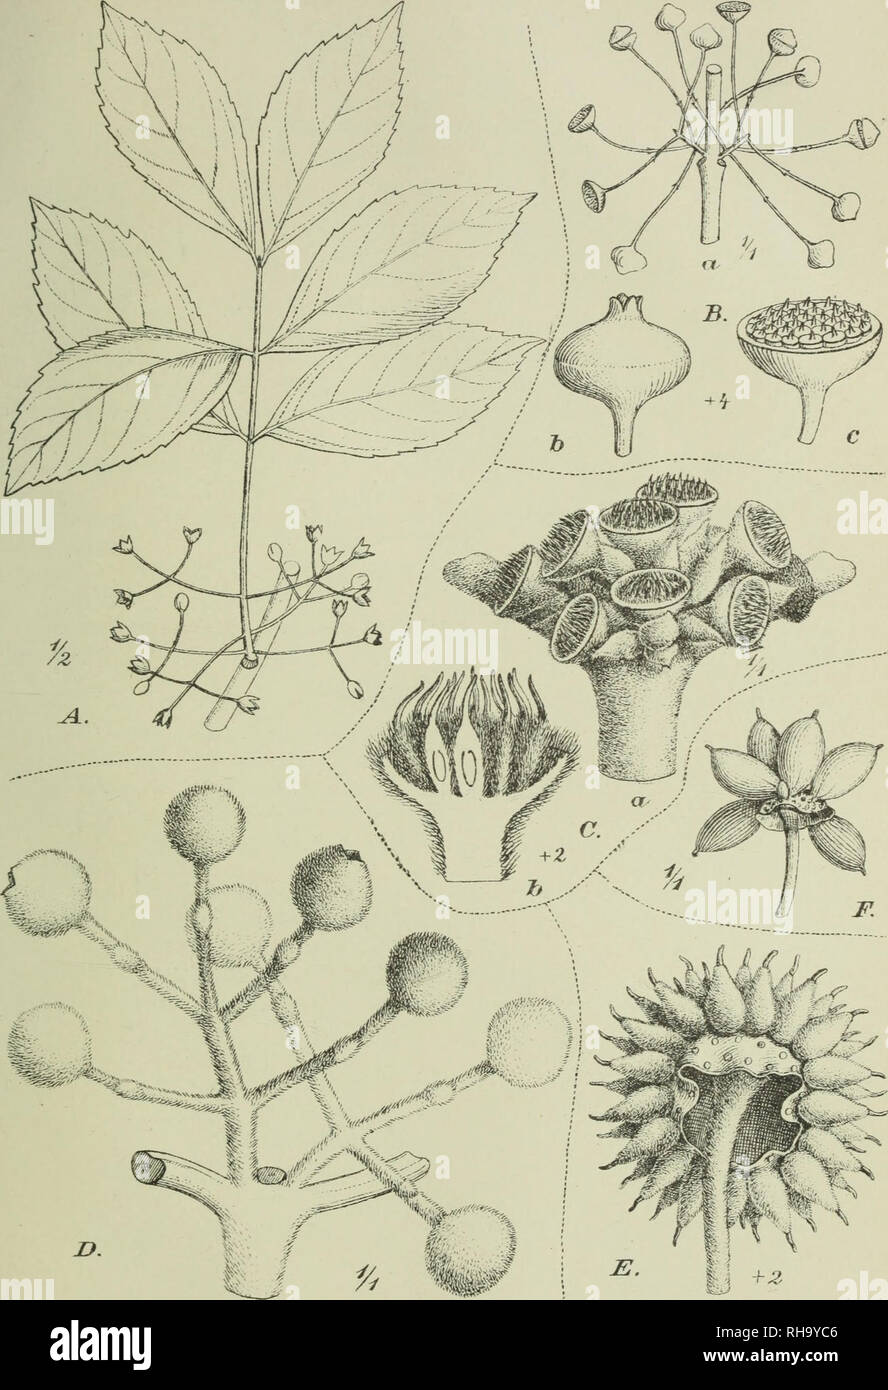 . Botanische Jahrbu?cher fu?r Systematik, Pflanzengeschichte und Pflanzengeographie. Botany; Plantengeografie; Paleobotanie; Taxonomie; Pflanzen. A. EngJer, Bot. Jahrb. Bd. XXVII. Taf. X.. A. Mollinedia calondonta l-rk., B. a—c. M. fasciculata Perk., C. a—b. M, lamprophylla Perk., D. M. Glaziovii Perk., E. M. Selloi (Spreng.) A. Ü. C, F. M. Schottiana (Spreng.) Perk. y. Pohl ad liai. del. Tcnag v.W'illu'lm l'iif^i'iiuannj, r^pdcj. Lith AnstJulius Klinkhardt Leipzig. Please note that these images are extracted from scanned page images that may have been digitally enhanced for readability - col Stock Photo